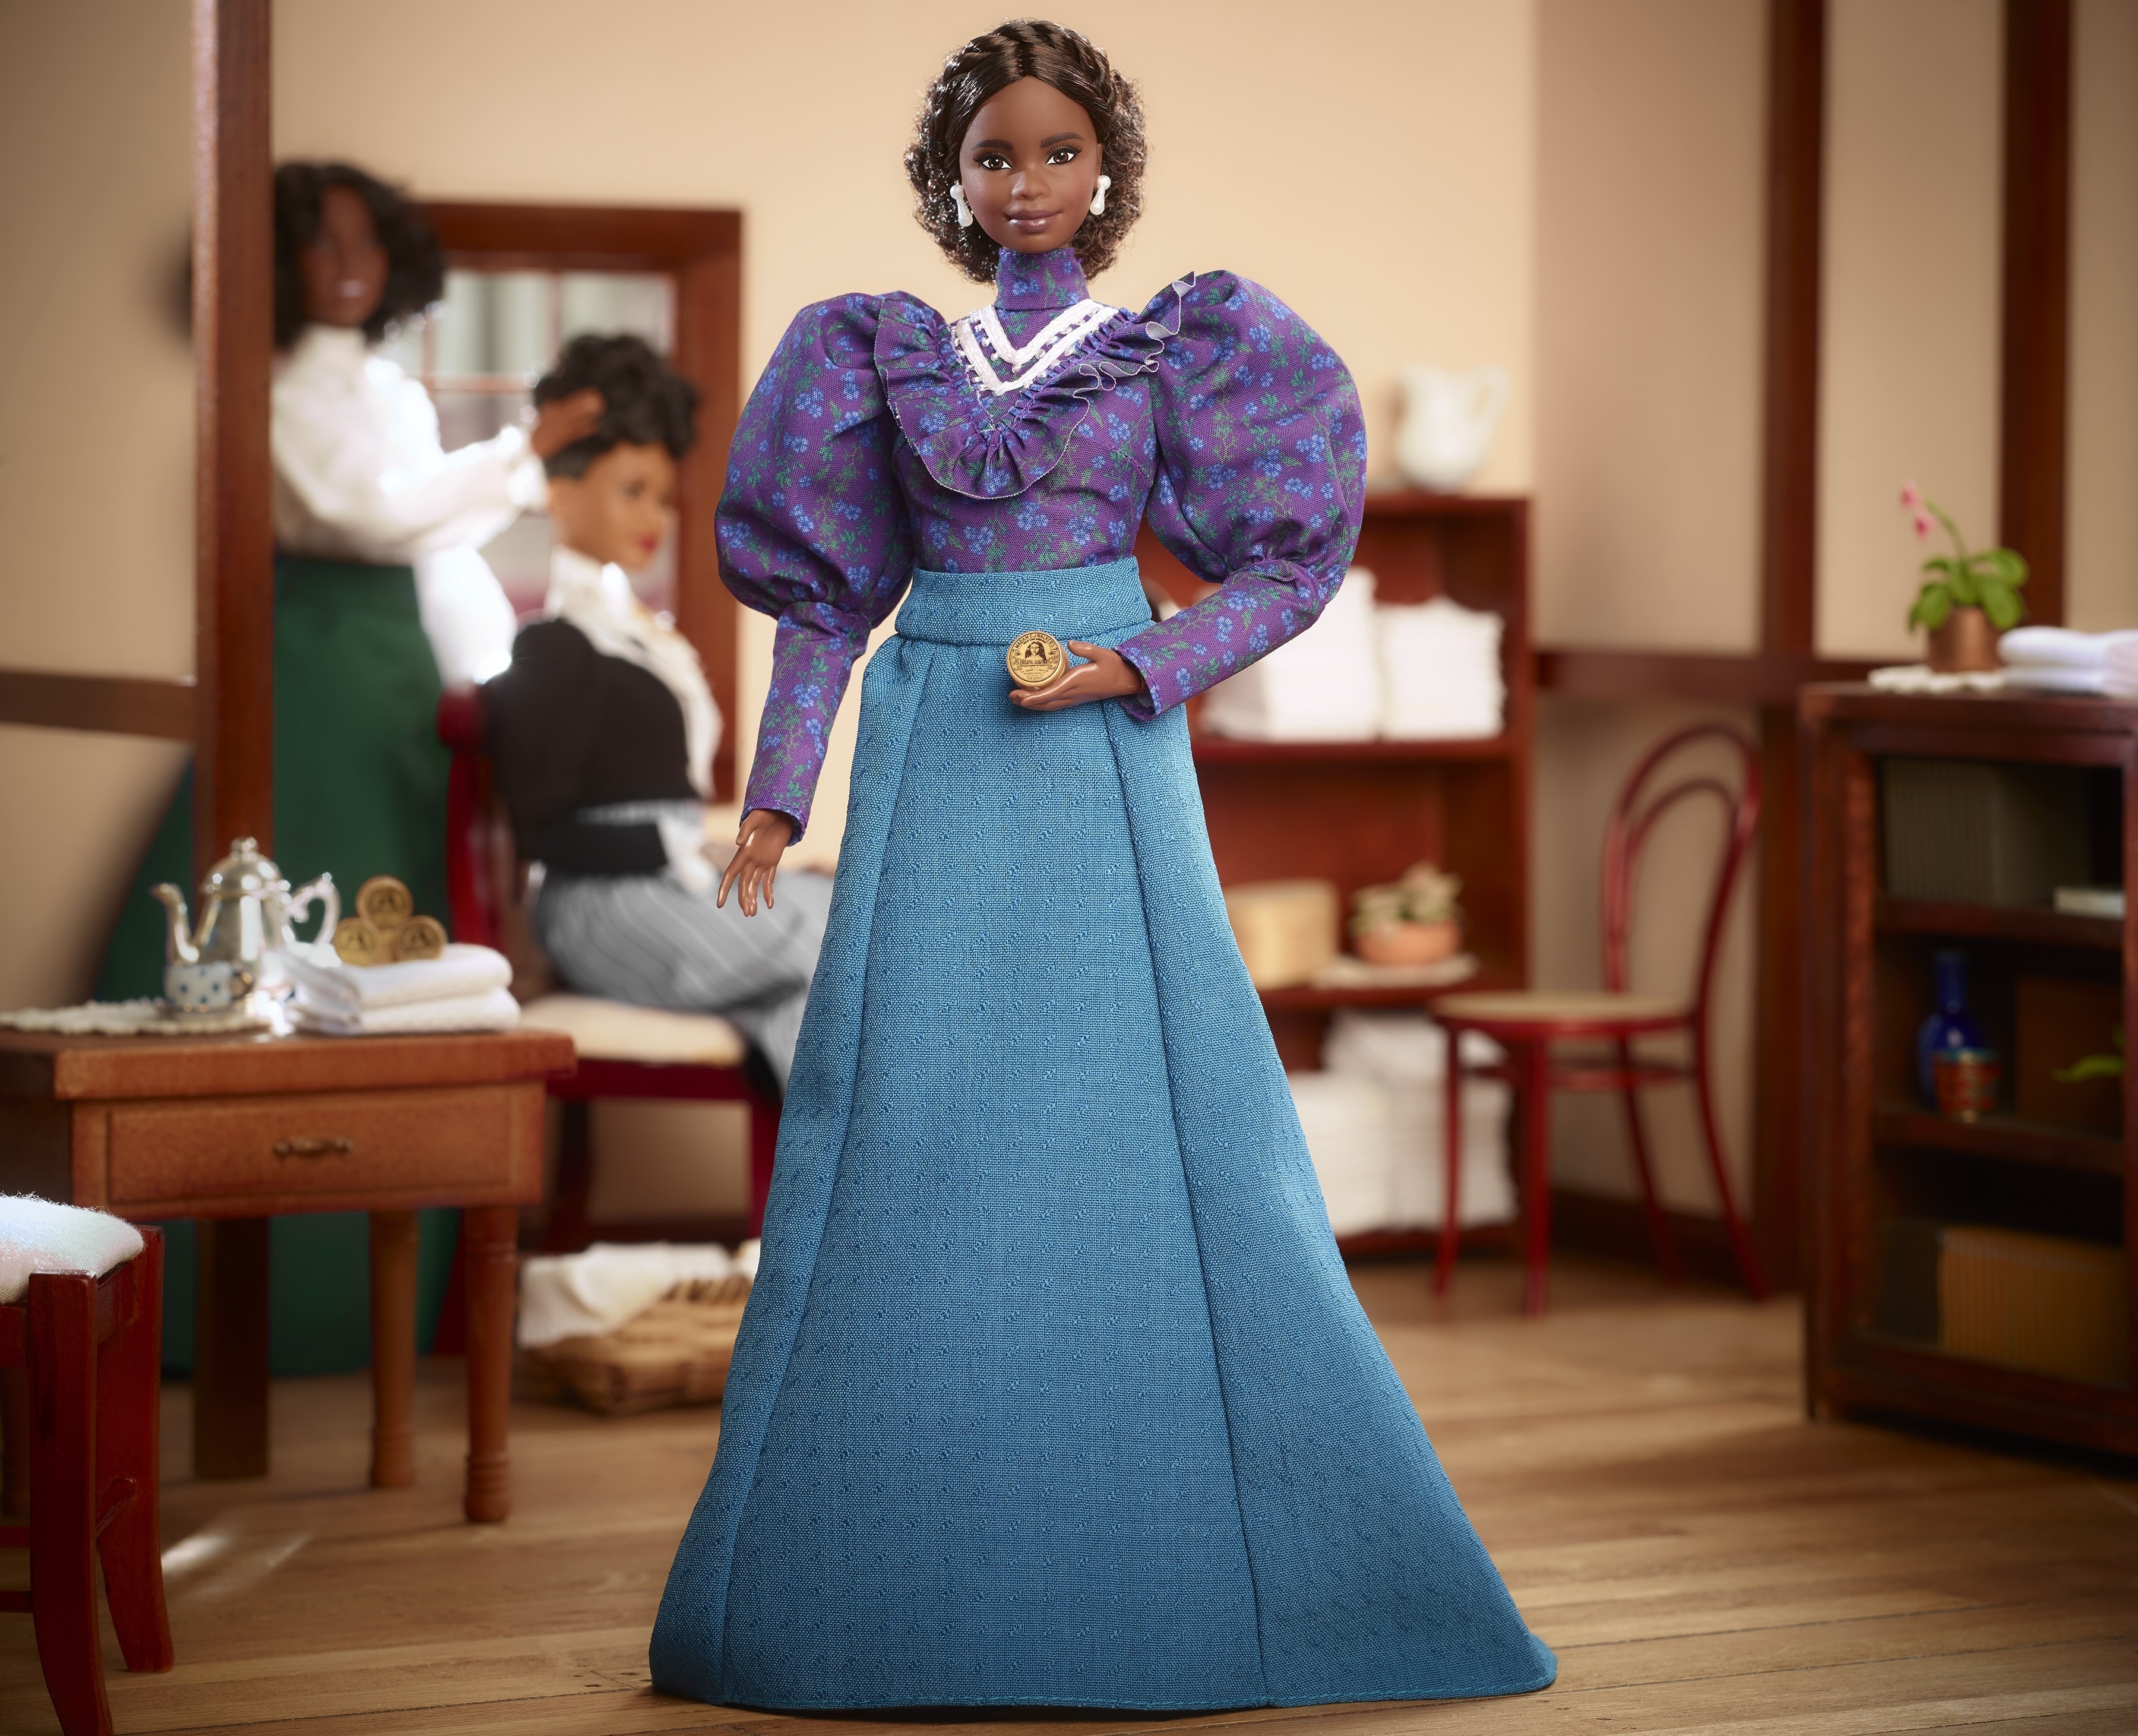 My first Barbie was Black and it meant so much for representation